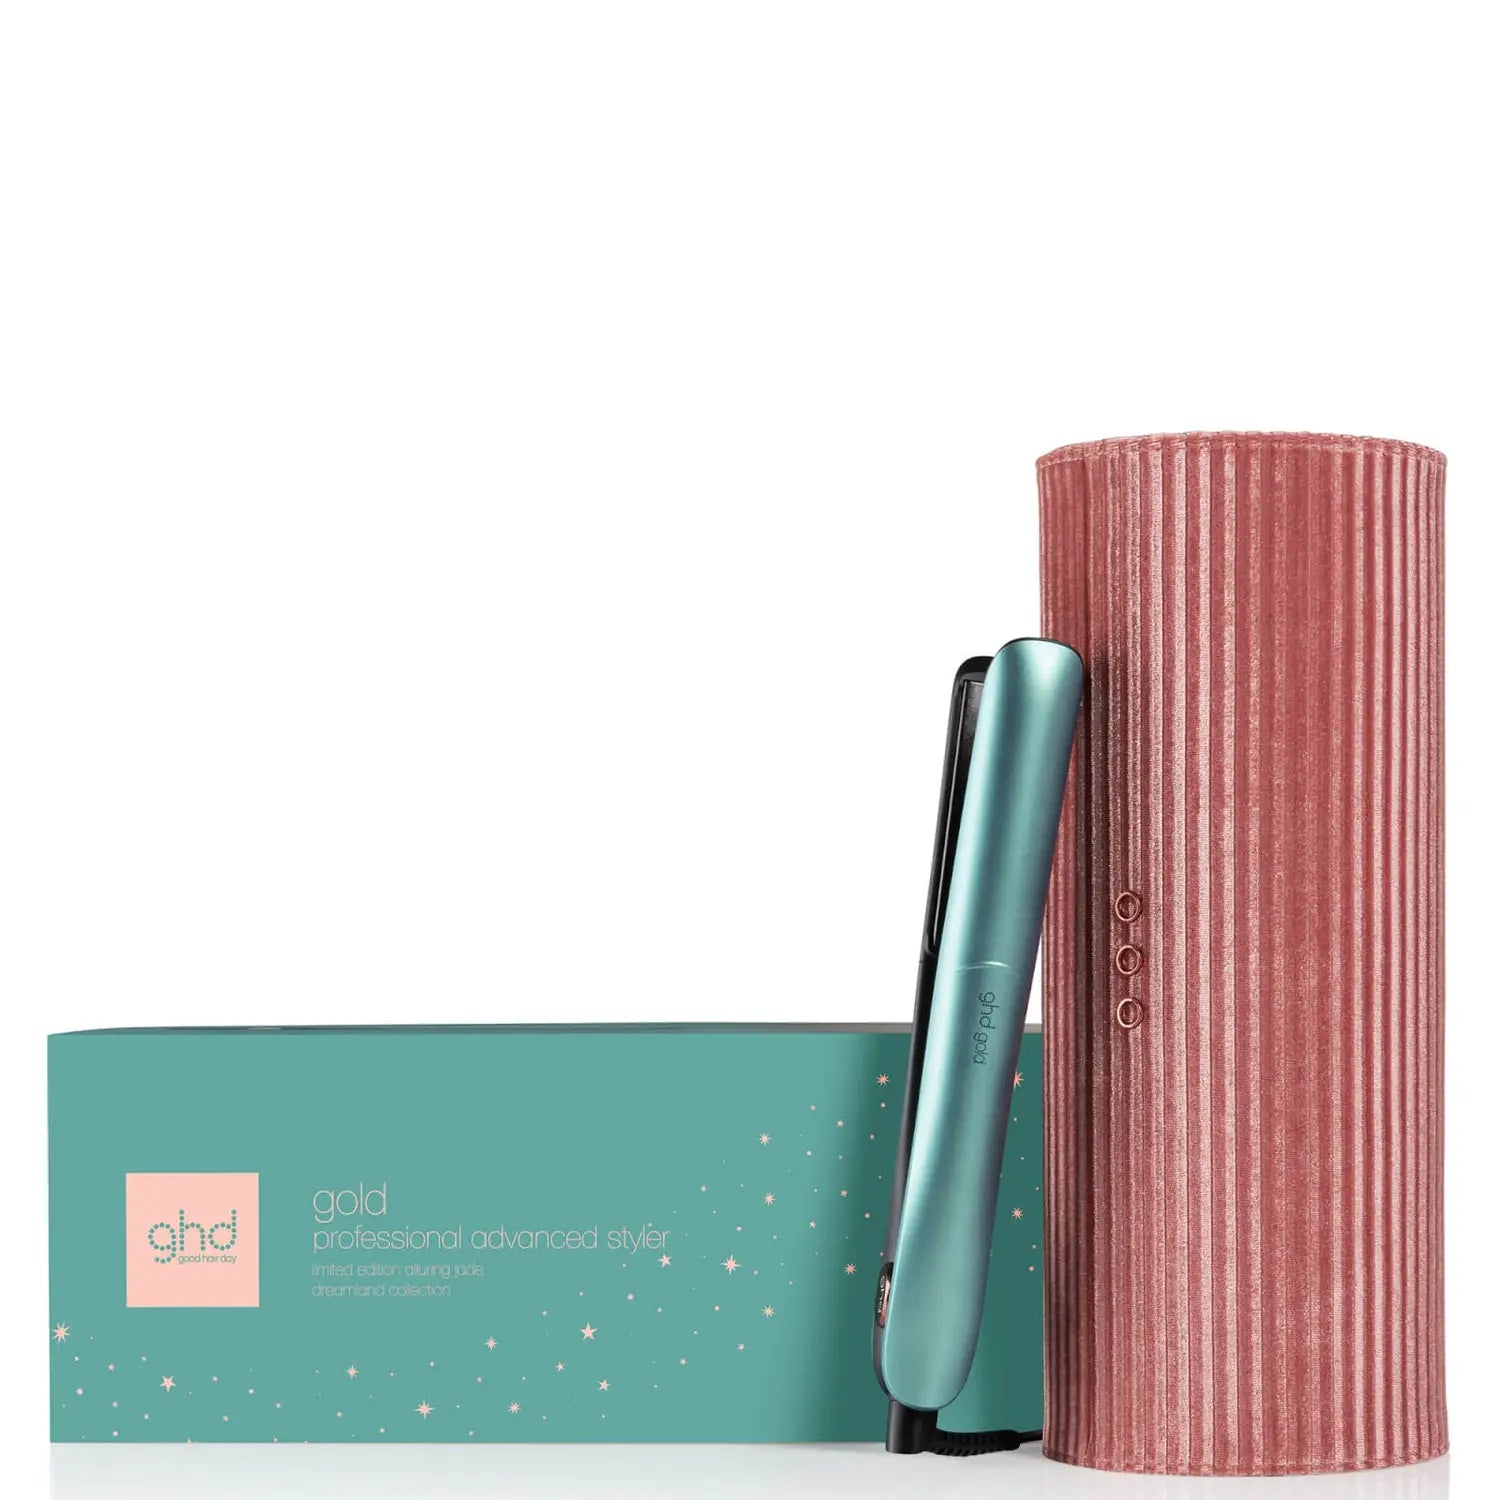 ghd Gold Hair Straightener In Alluring Jade, with vanit case and packaging